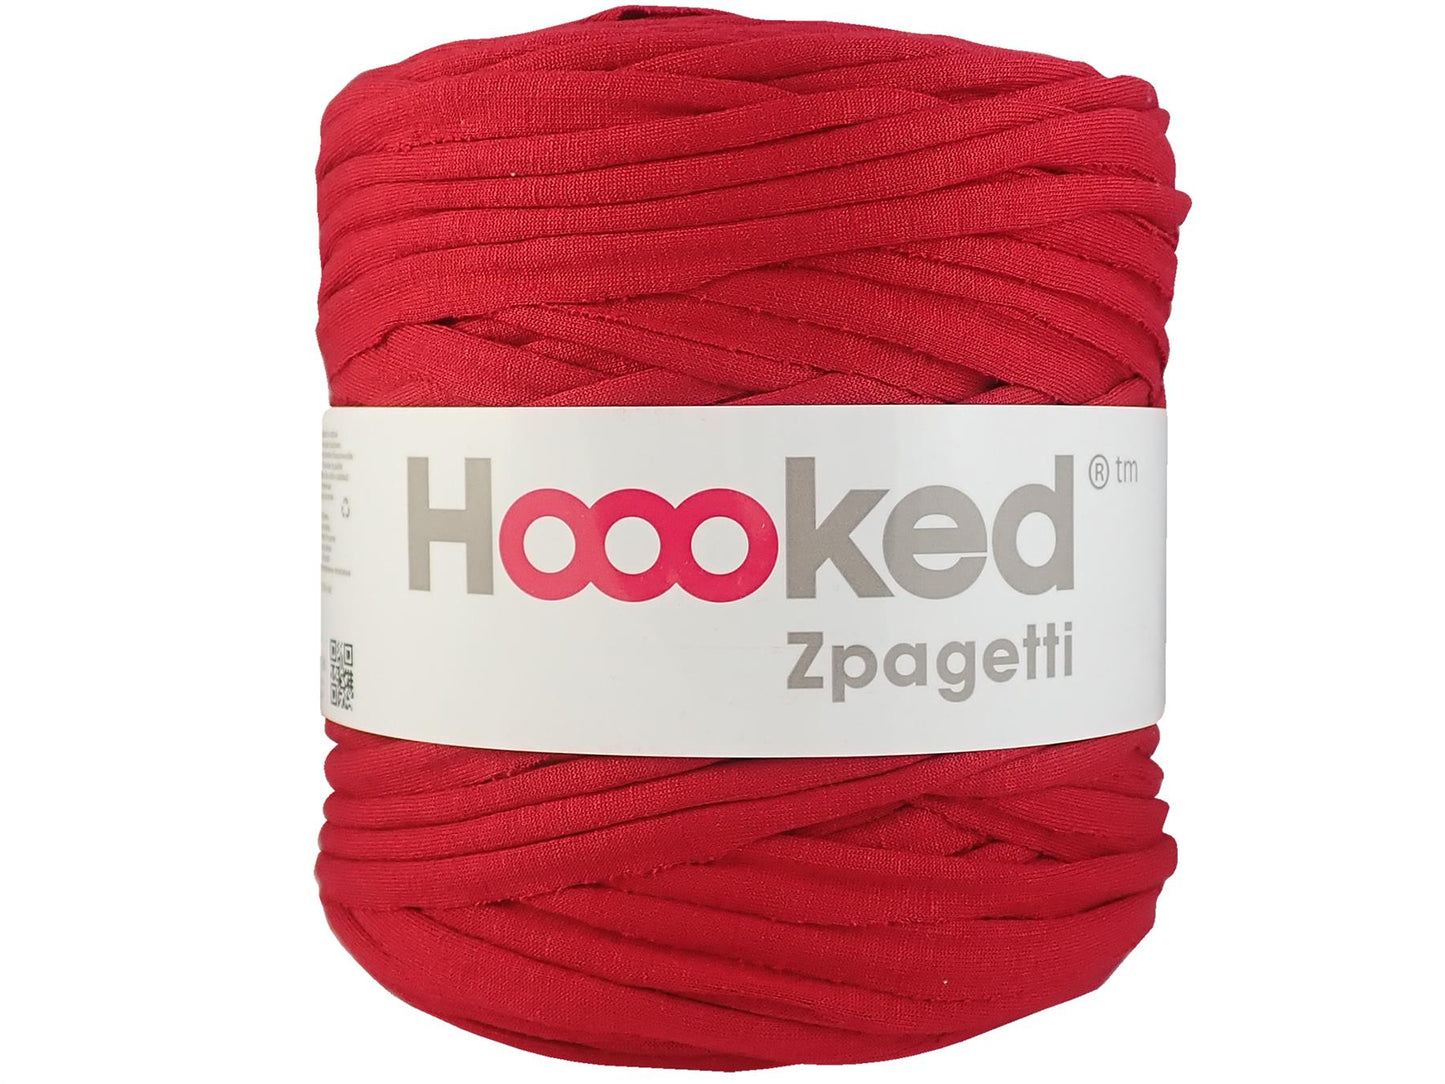 Hoooked Zpagetti Red Cotton T-Shirt Yarn - 120M 700g